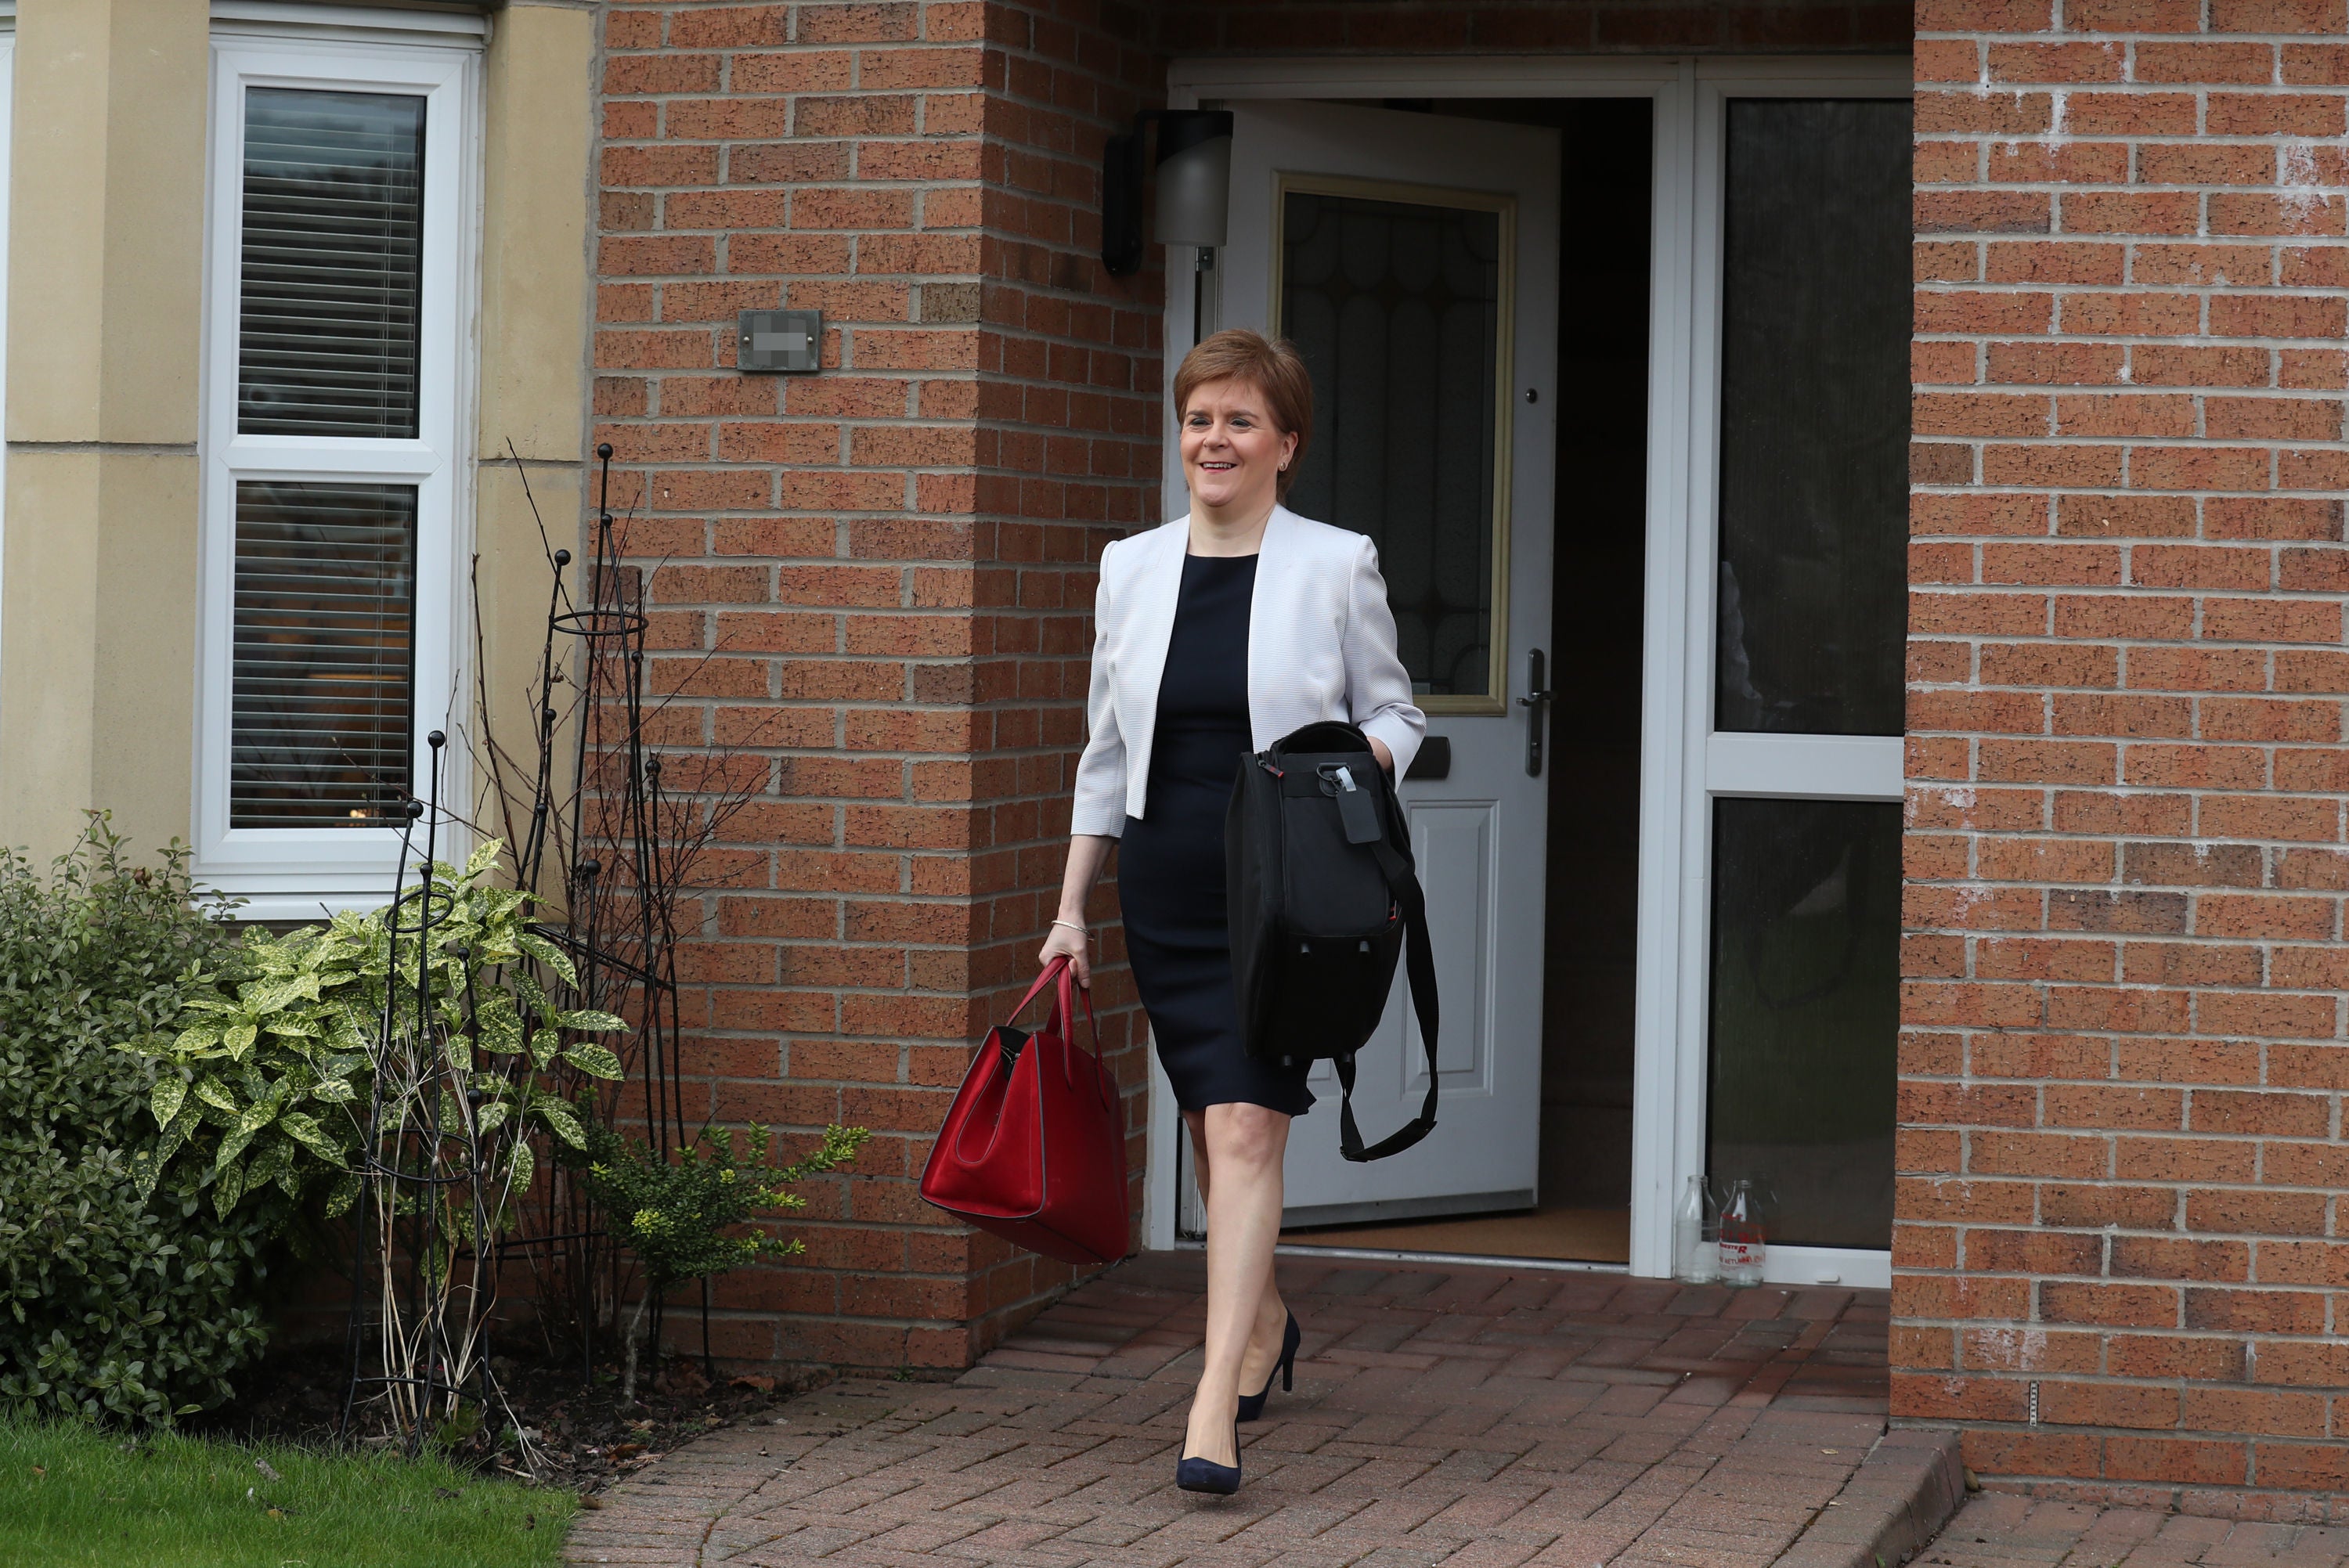 Nicola Sturgeon has dismissed calls to resign - but the independent probe could change that